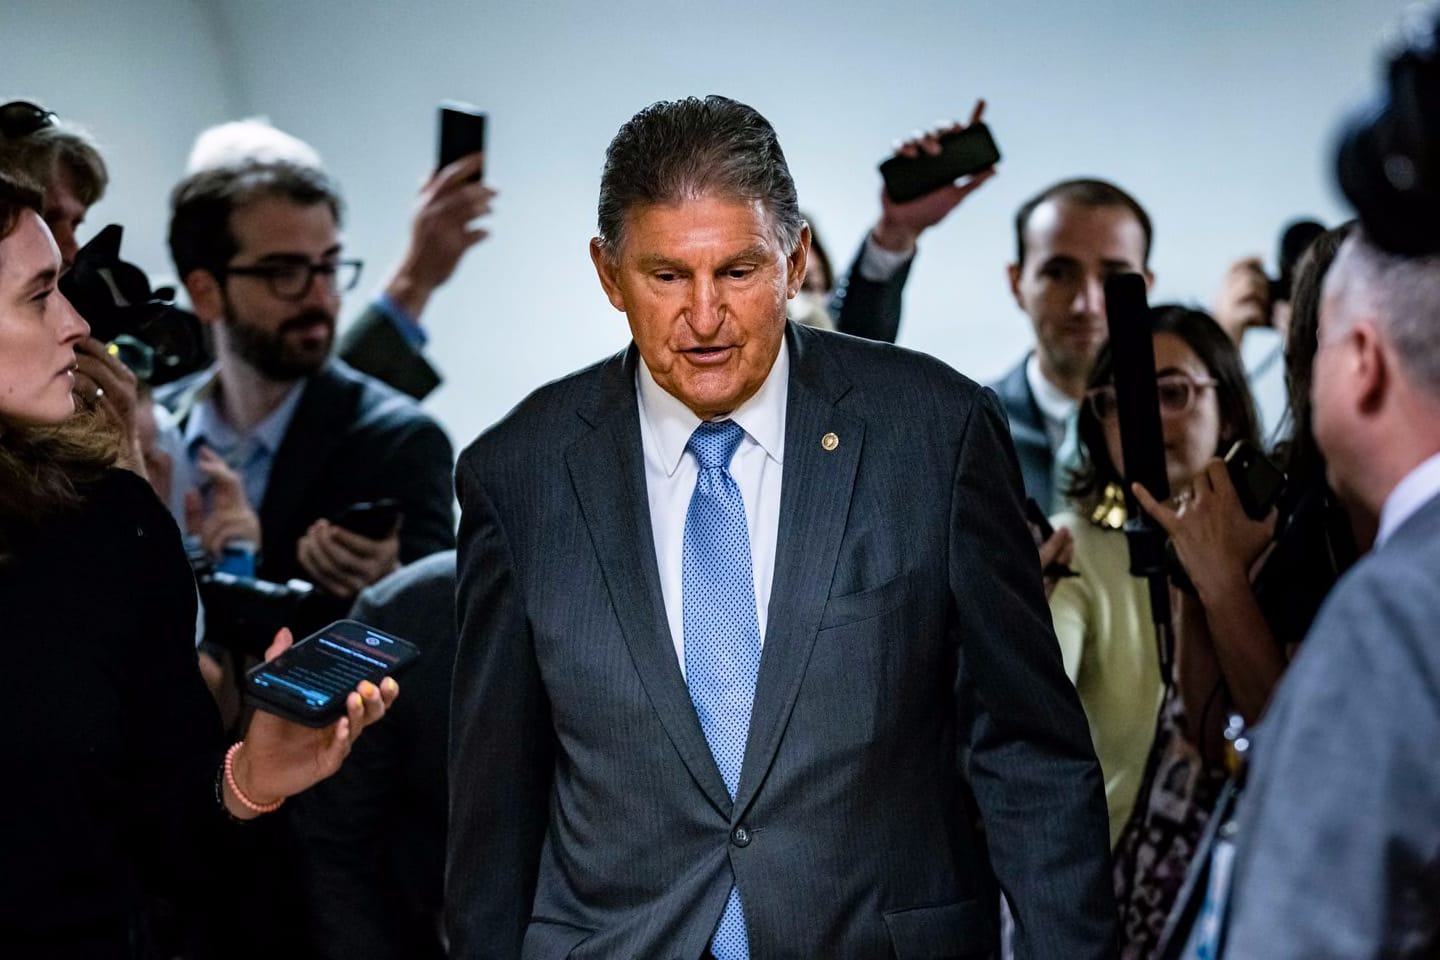 Senator Joe Manchin, Democrat of West Virginia, was surrounded by reporters as he headed to a vote in the Senate at the US Capitol on June 8. The spotlight on Manchin is growing even brighter now that he is the lone Democratic holdout on the party's voting rights legislation.